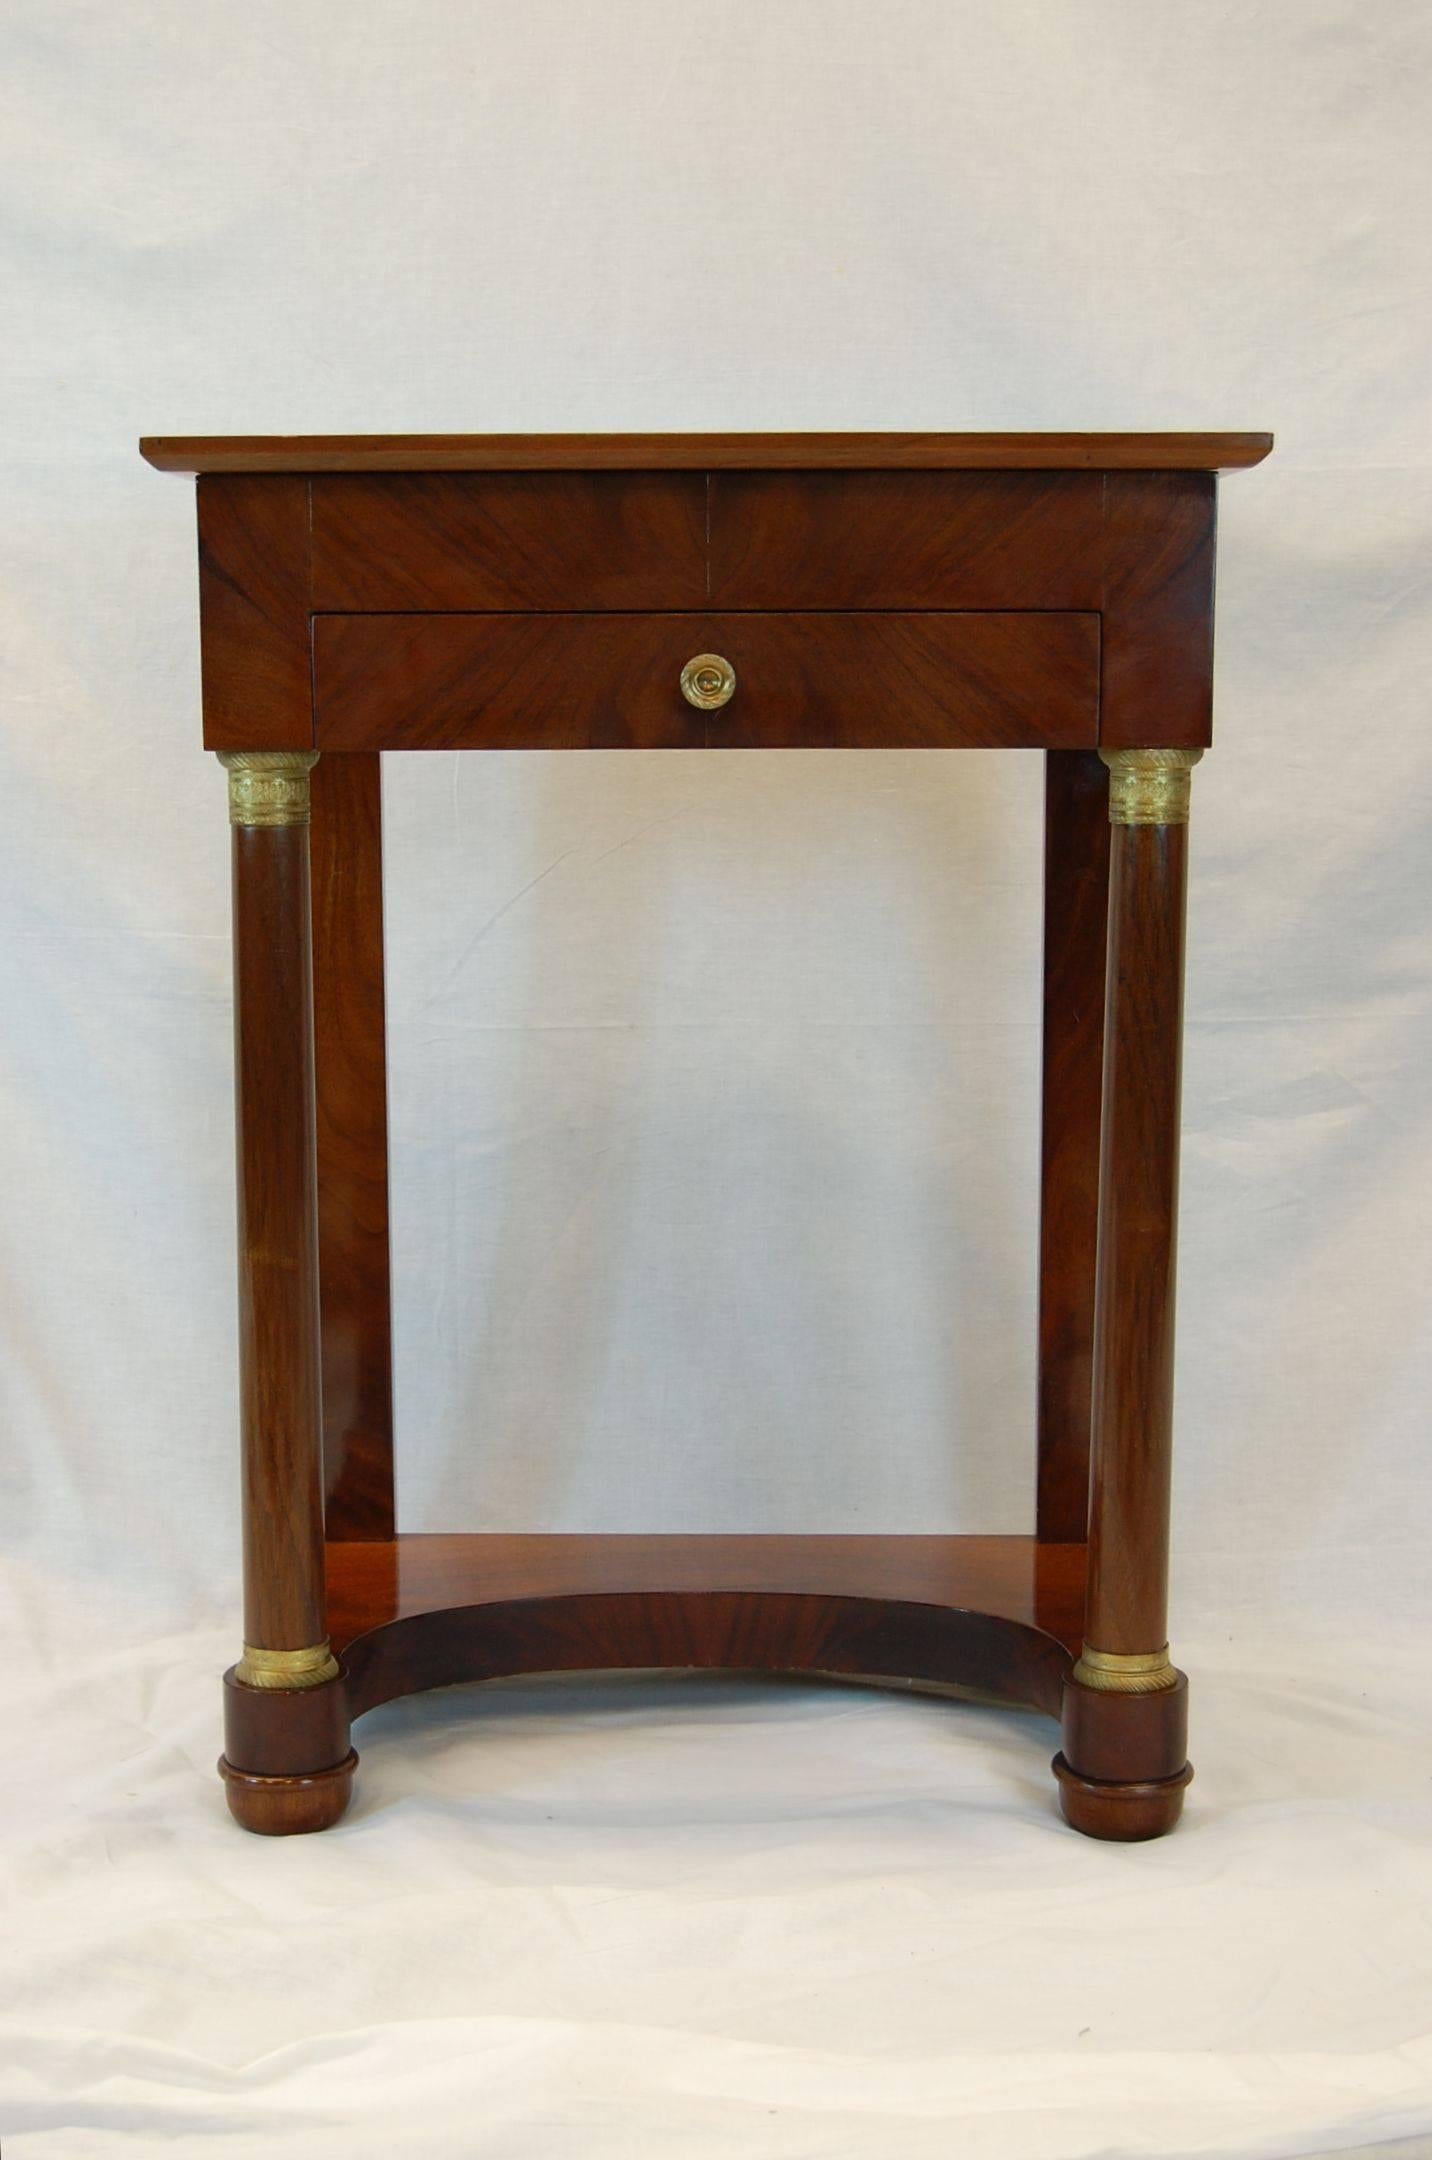 French Empire Mahogany Sewing or Dressing Table with Drawer and Flip-Up Top, circa 1880